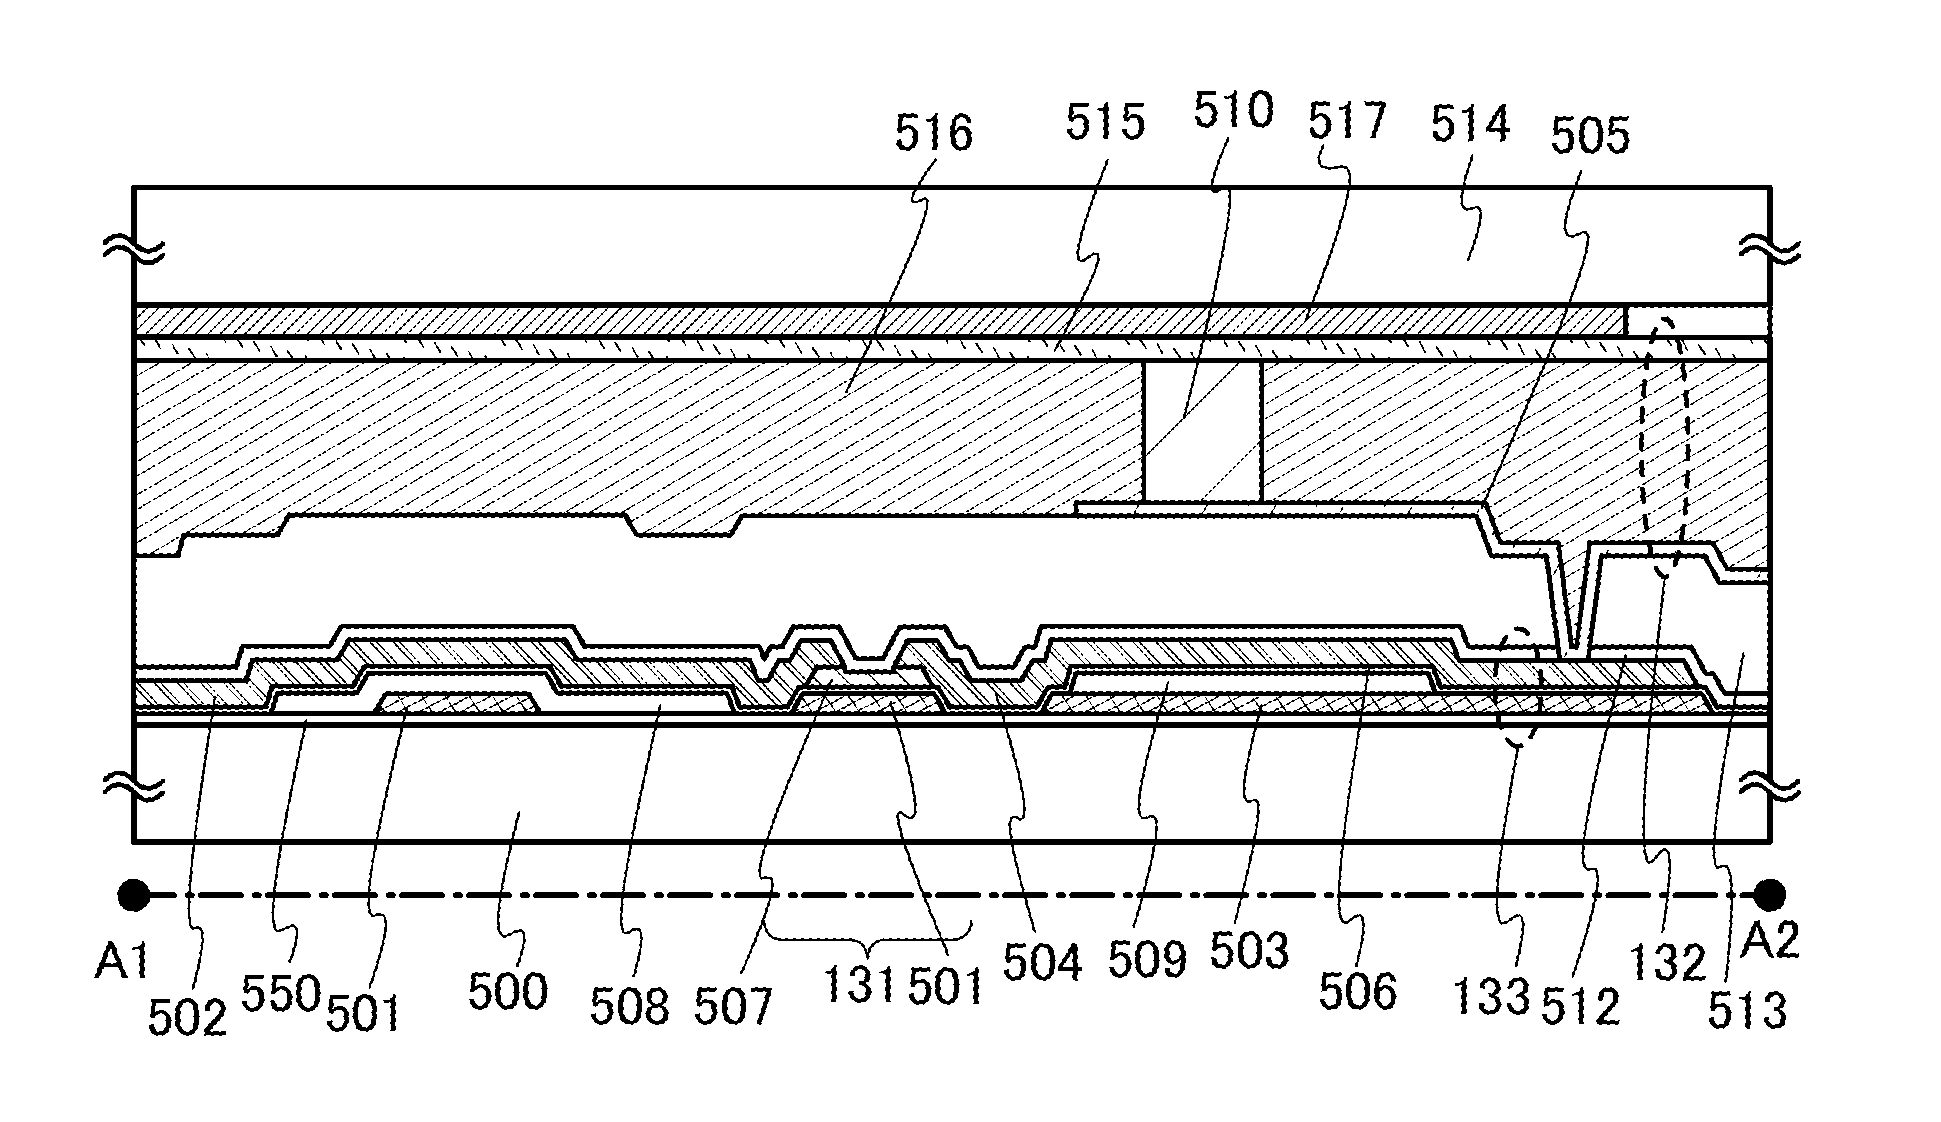 Semiconductor display device